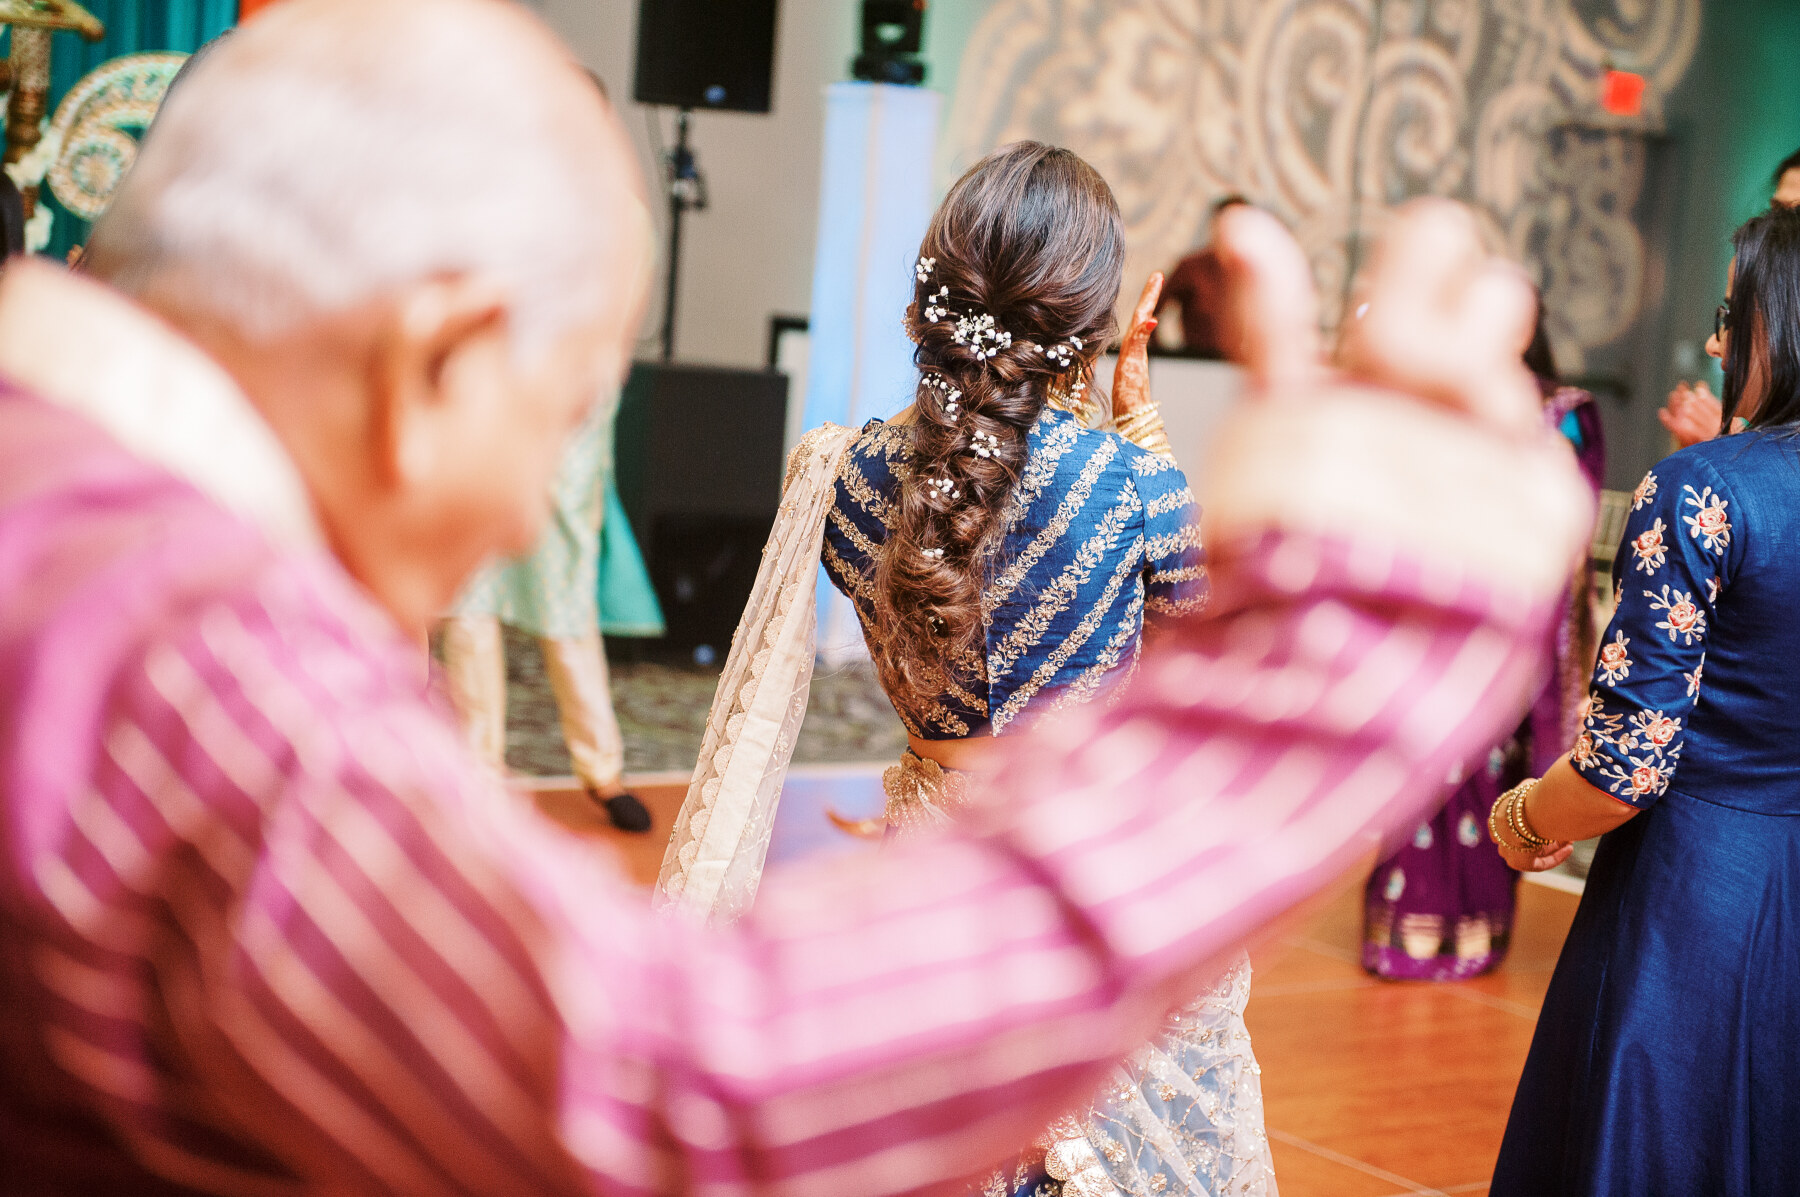 Ananya + Harsh dancing at theirSangeet captured by Jamie Vinson Photography